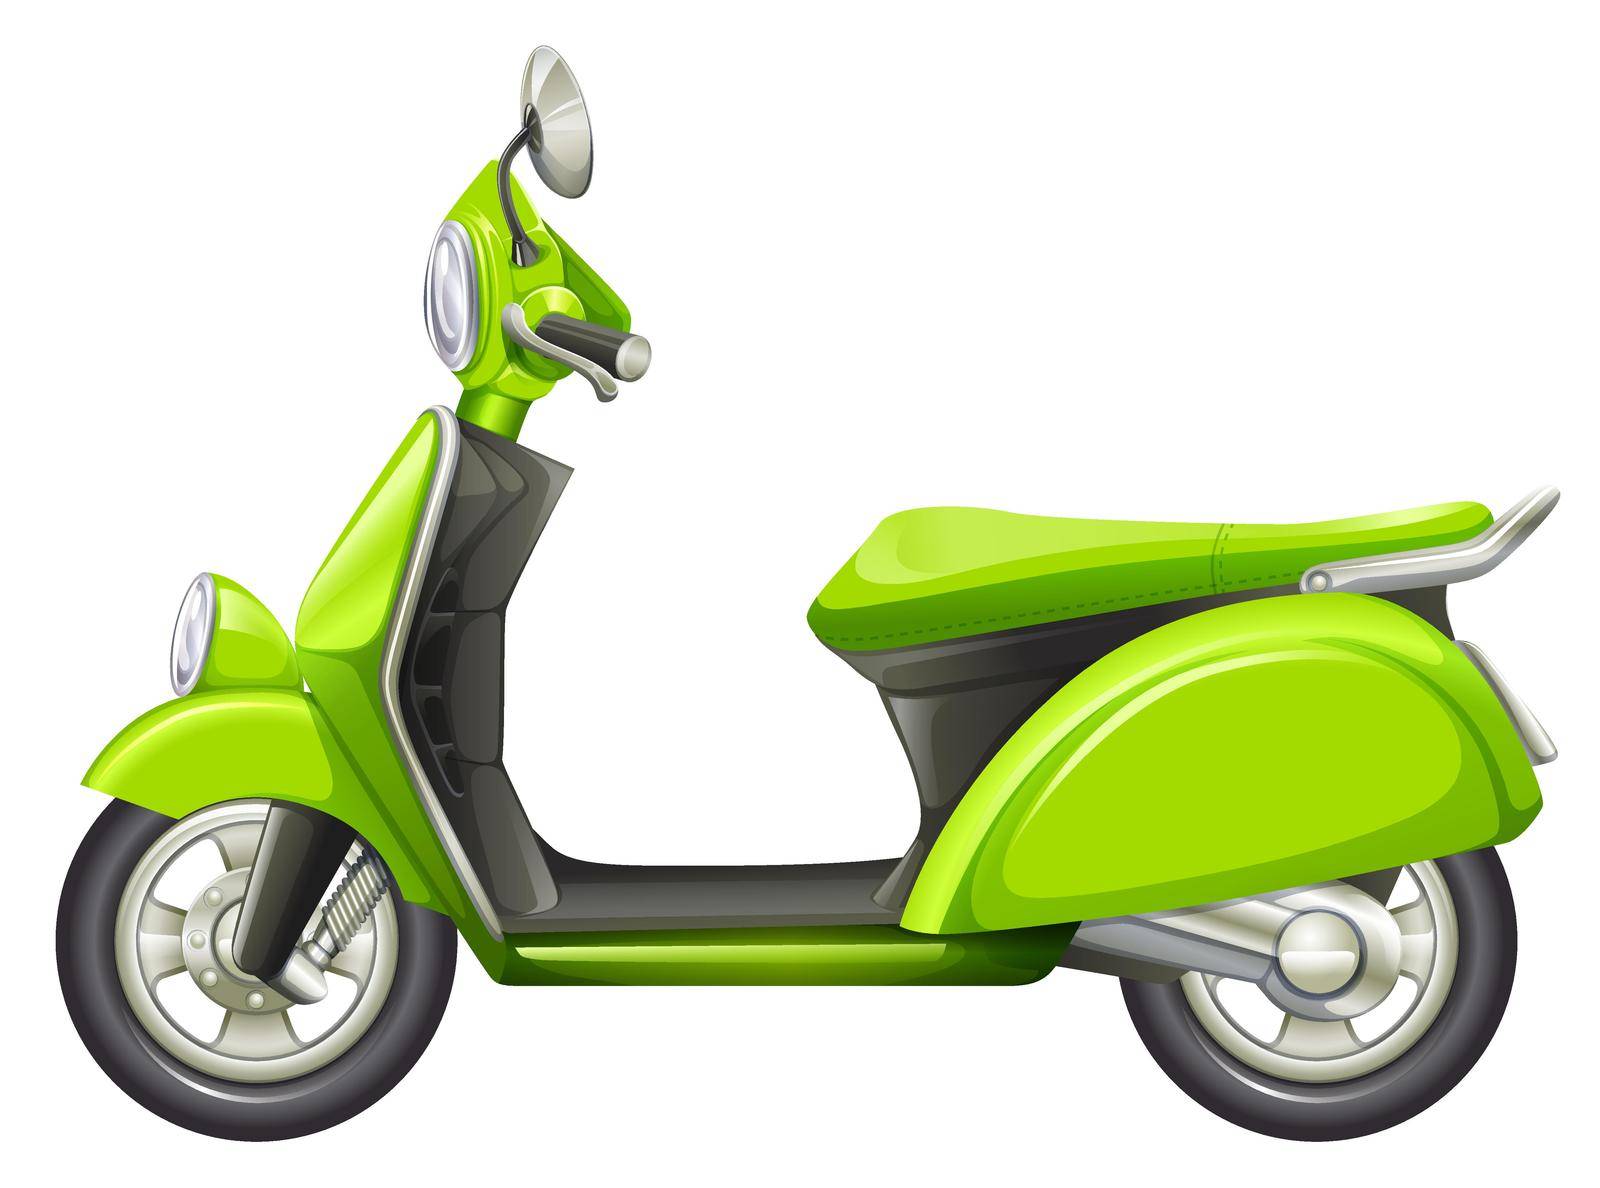 A green scooter by iimages